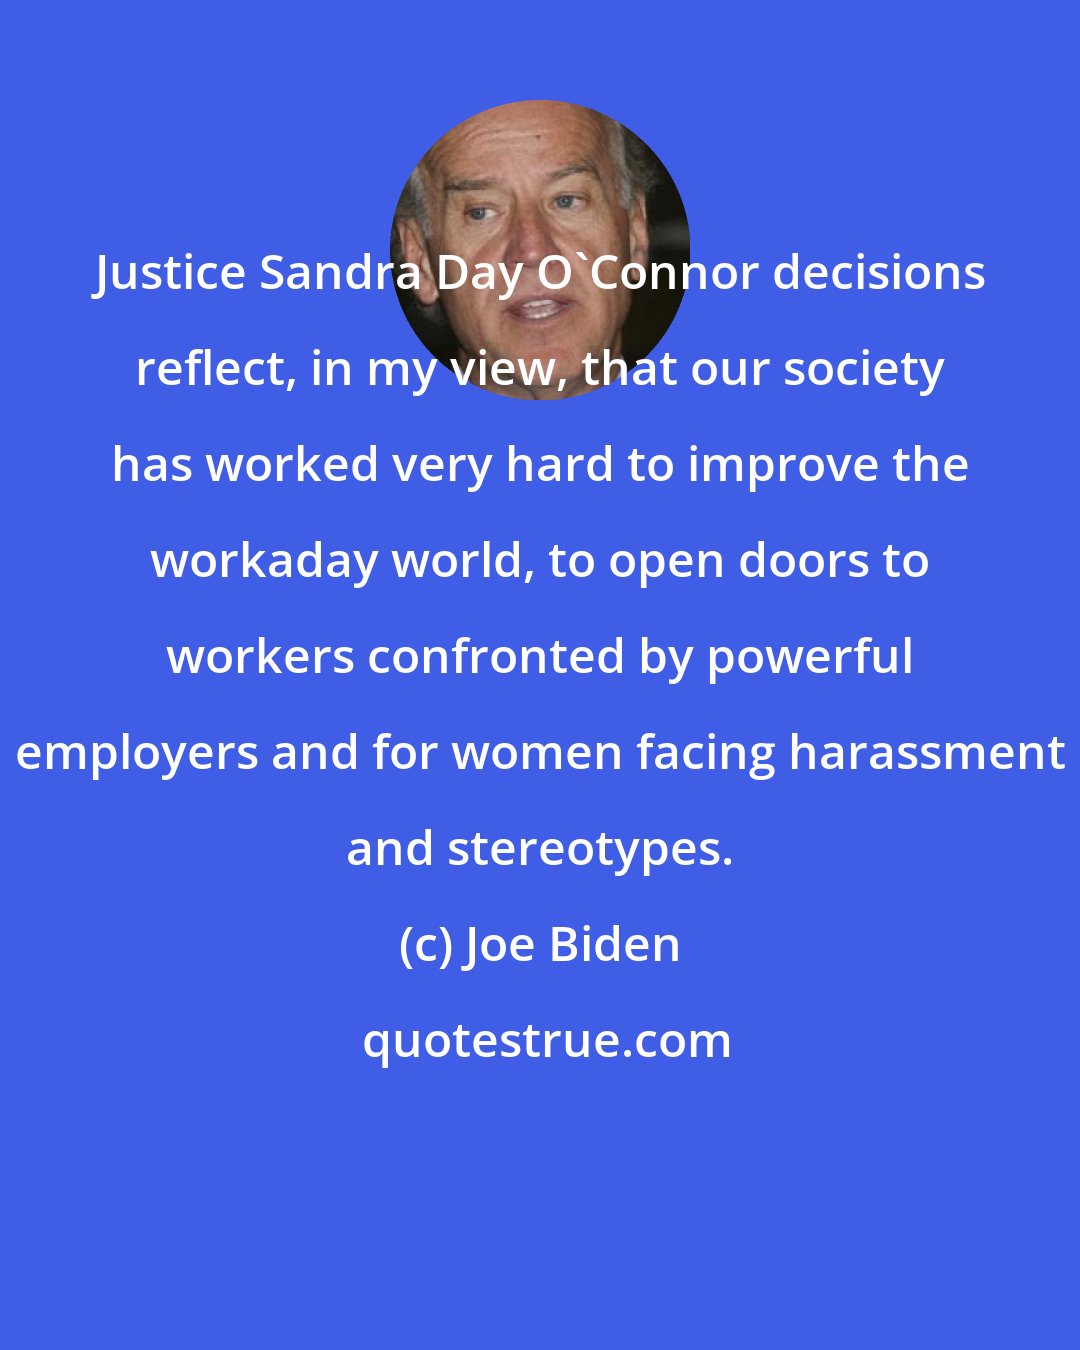 Joe Biden: Justice Sandra Day O'Connor decisions reflect, in my view, that our society has worked very hard to improve the workaday world, to open doors to workers confronted by powerful employers and for women facing harassment and stereotypes.